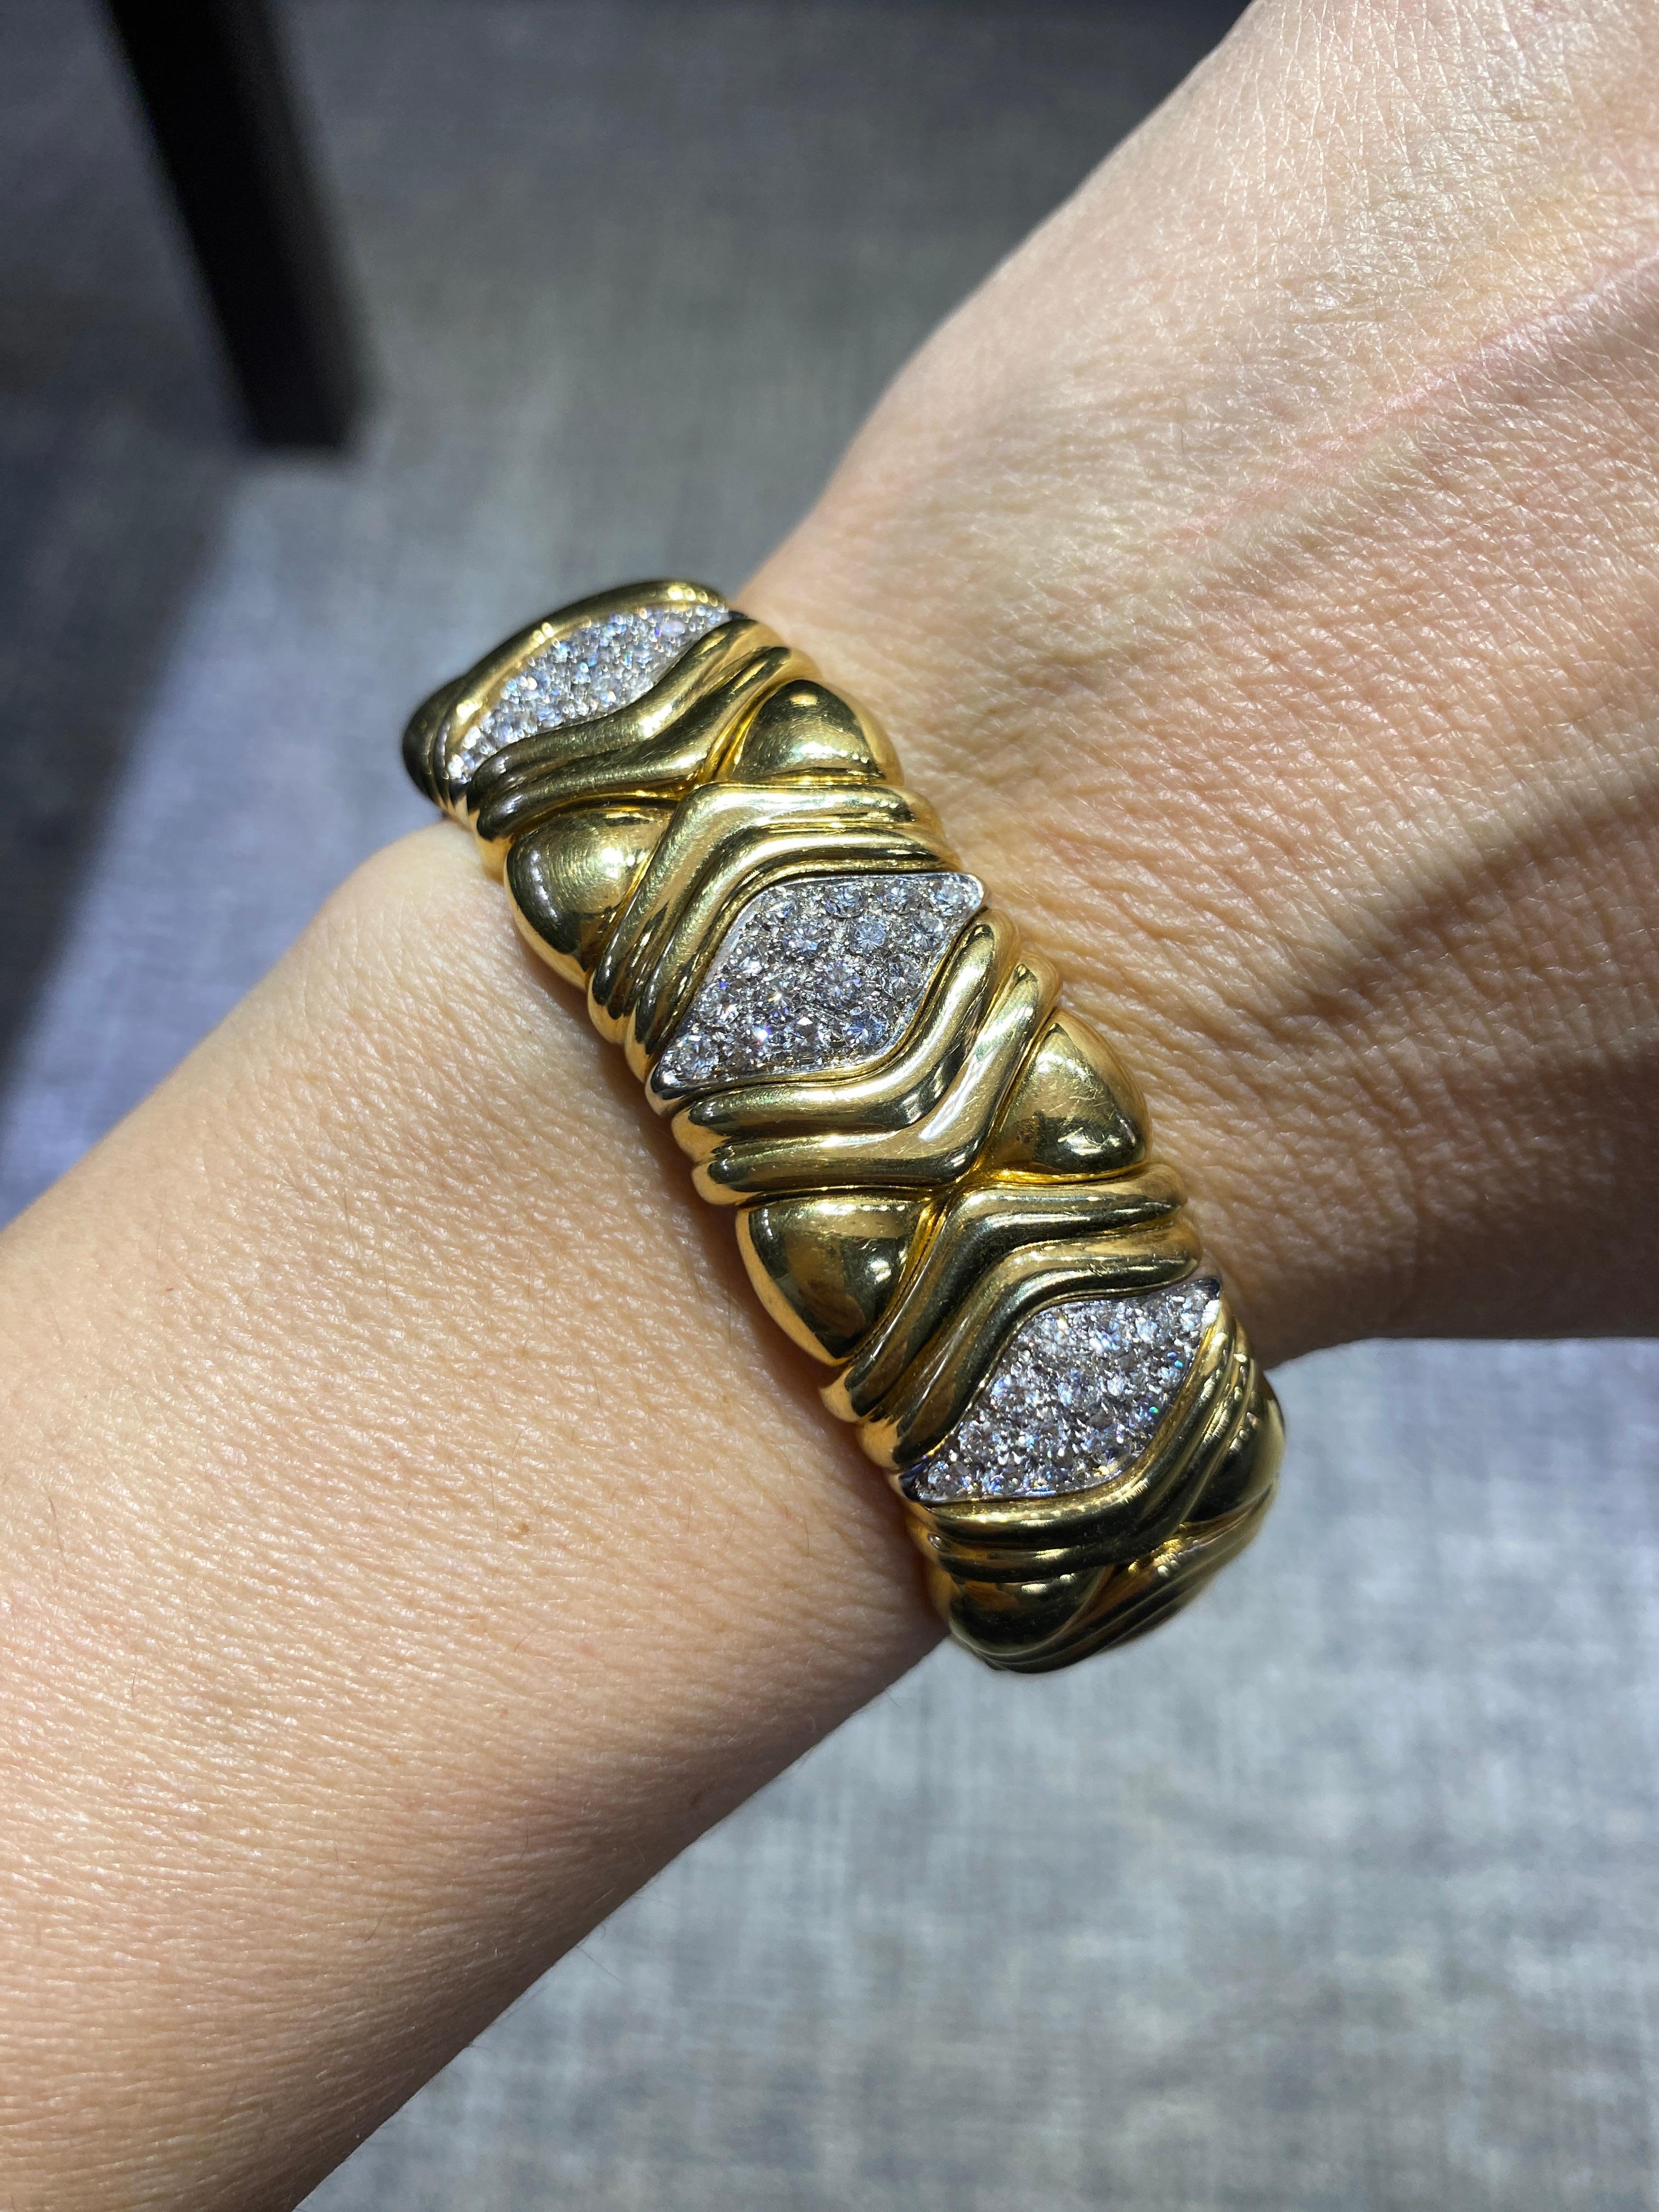 This 1980s Wempe gold and diamond cuff is a hefty piece and very comfortable to wear. It expands to let in the wrist and sits snuggly around it. It is a beautifully made piece. 